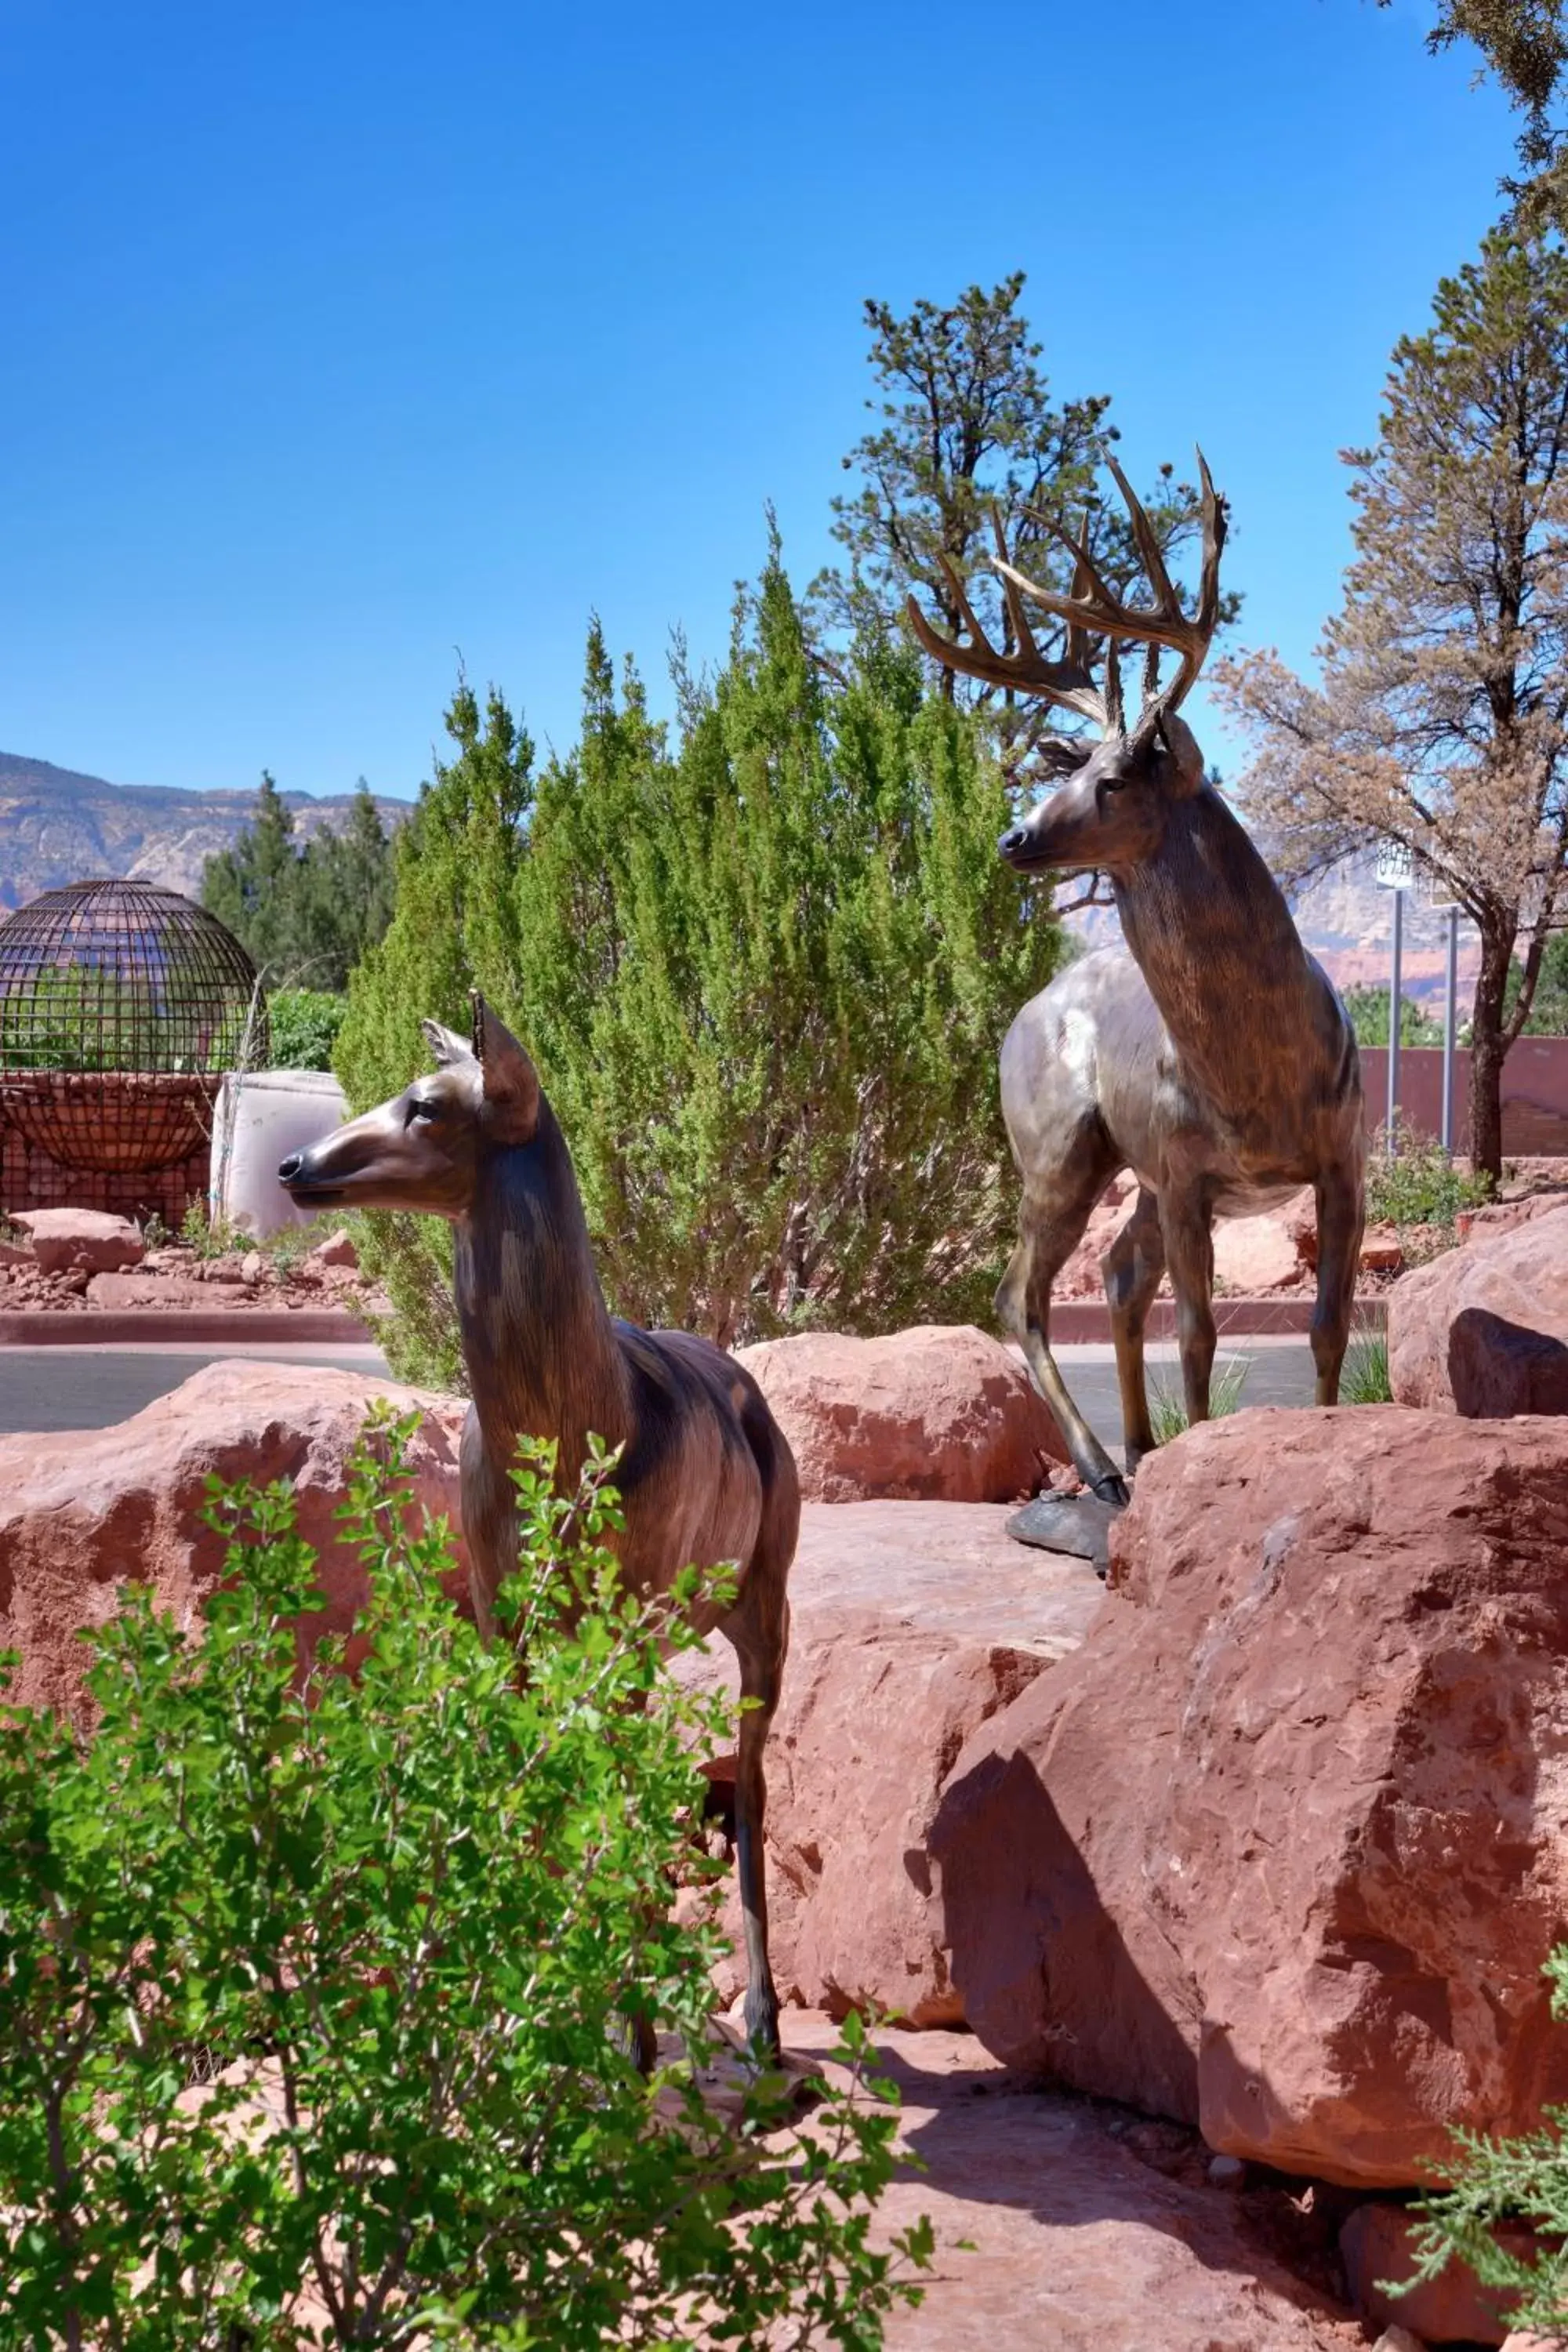 Property building, Other Animals in Residence Inn by Marriott Sedona